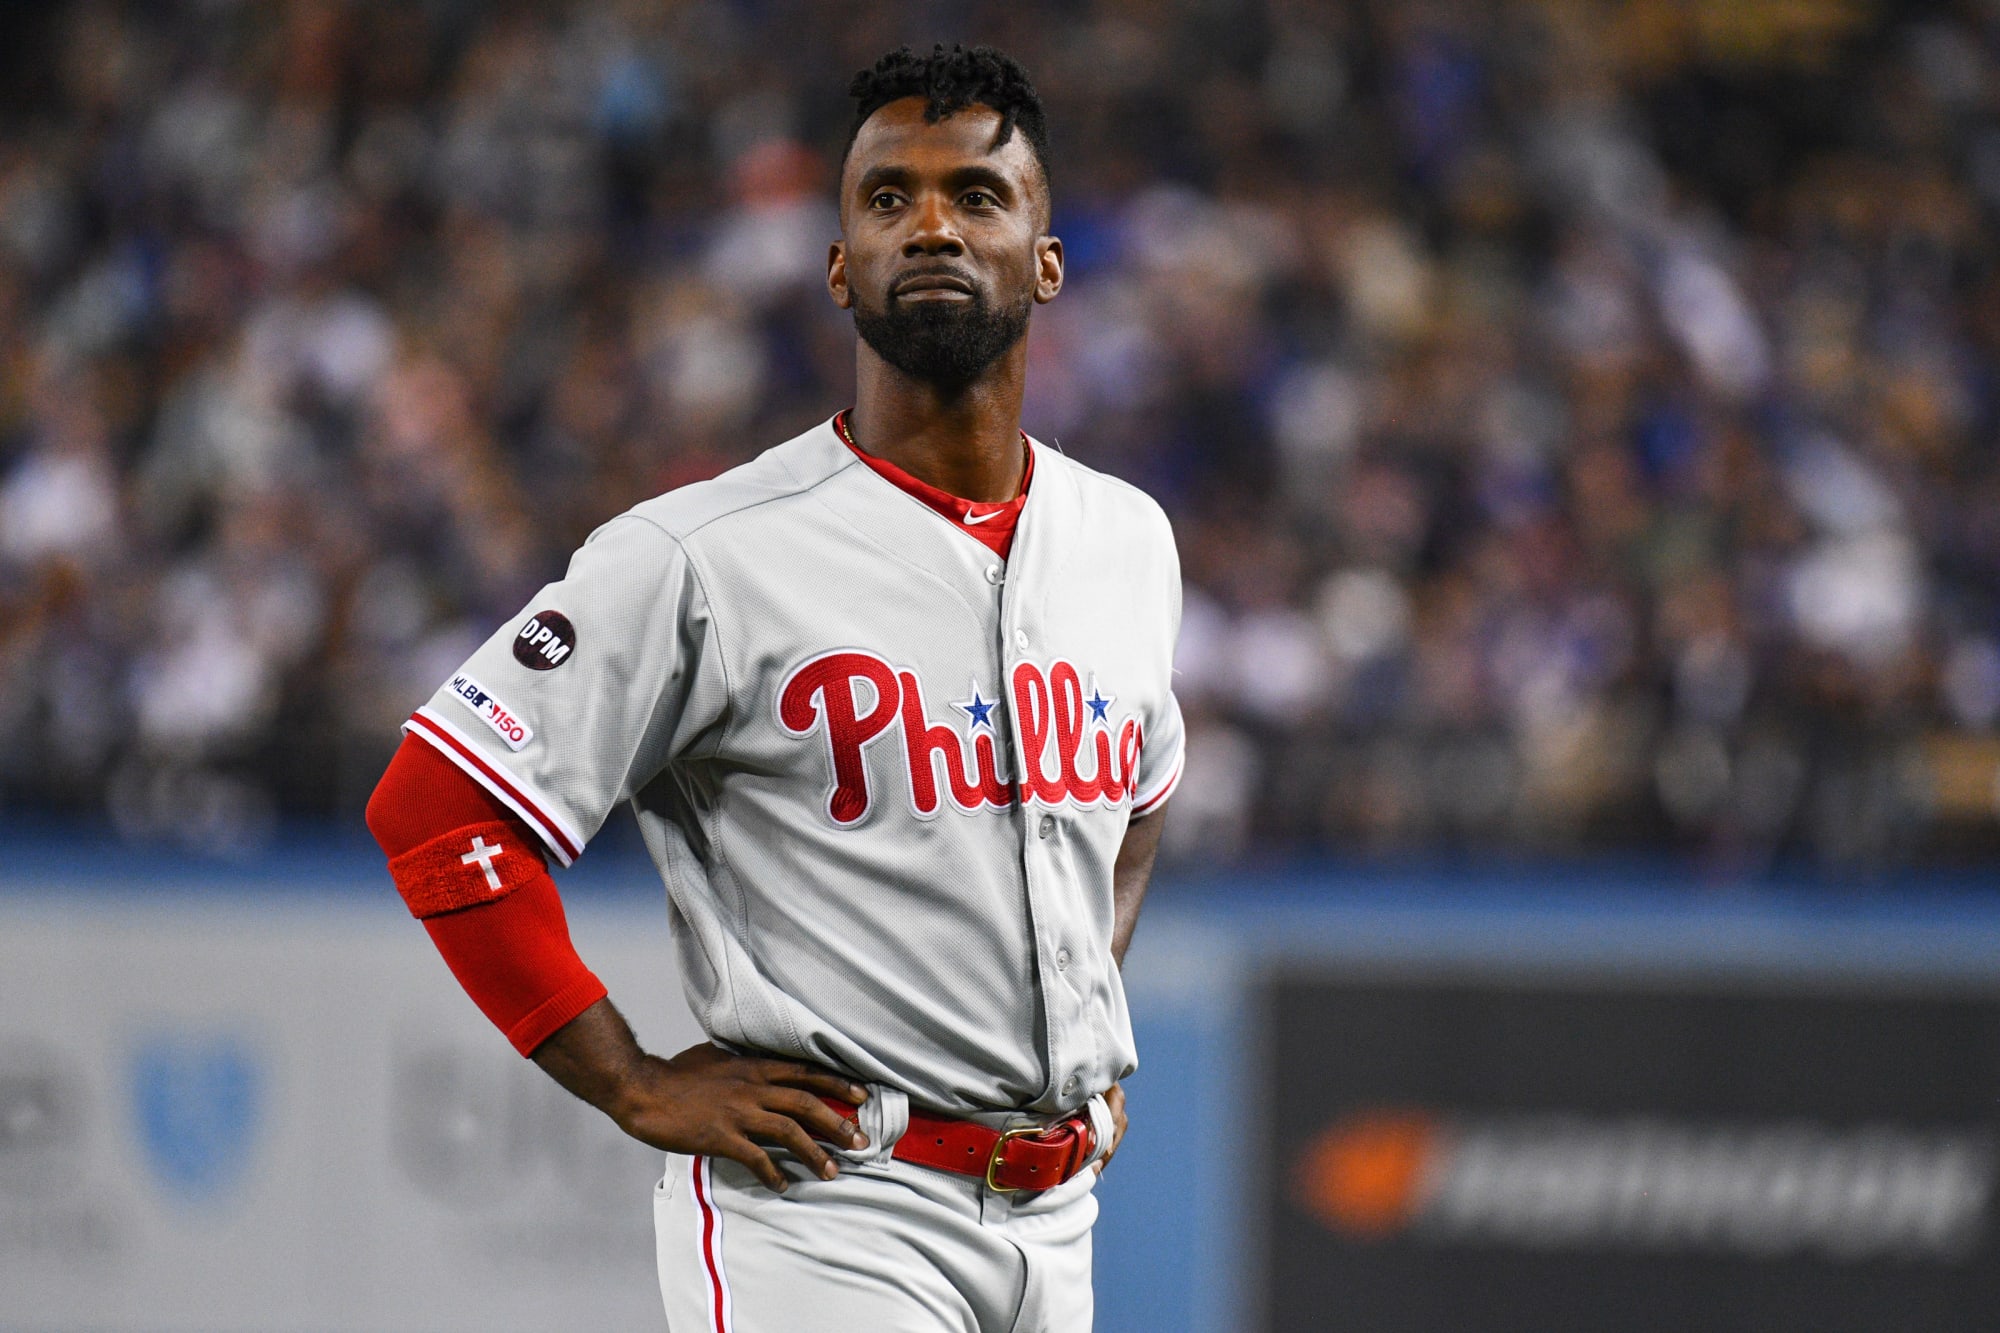 Andrew McCutchen: Yankees Should Change Their Hair Policy